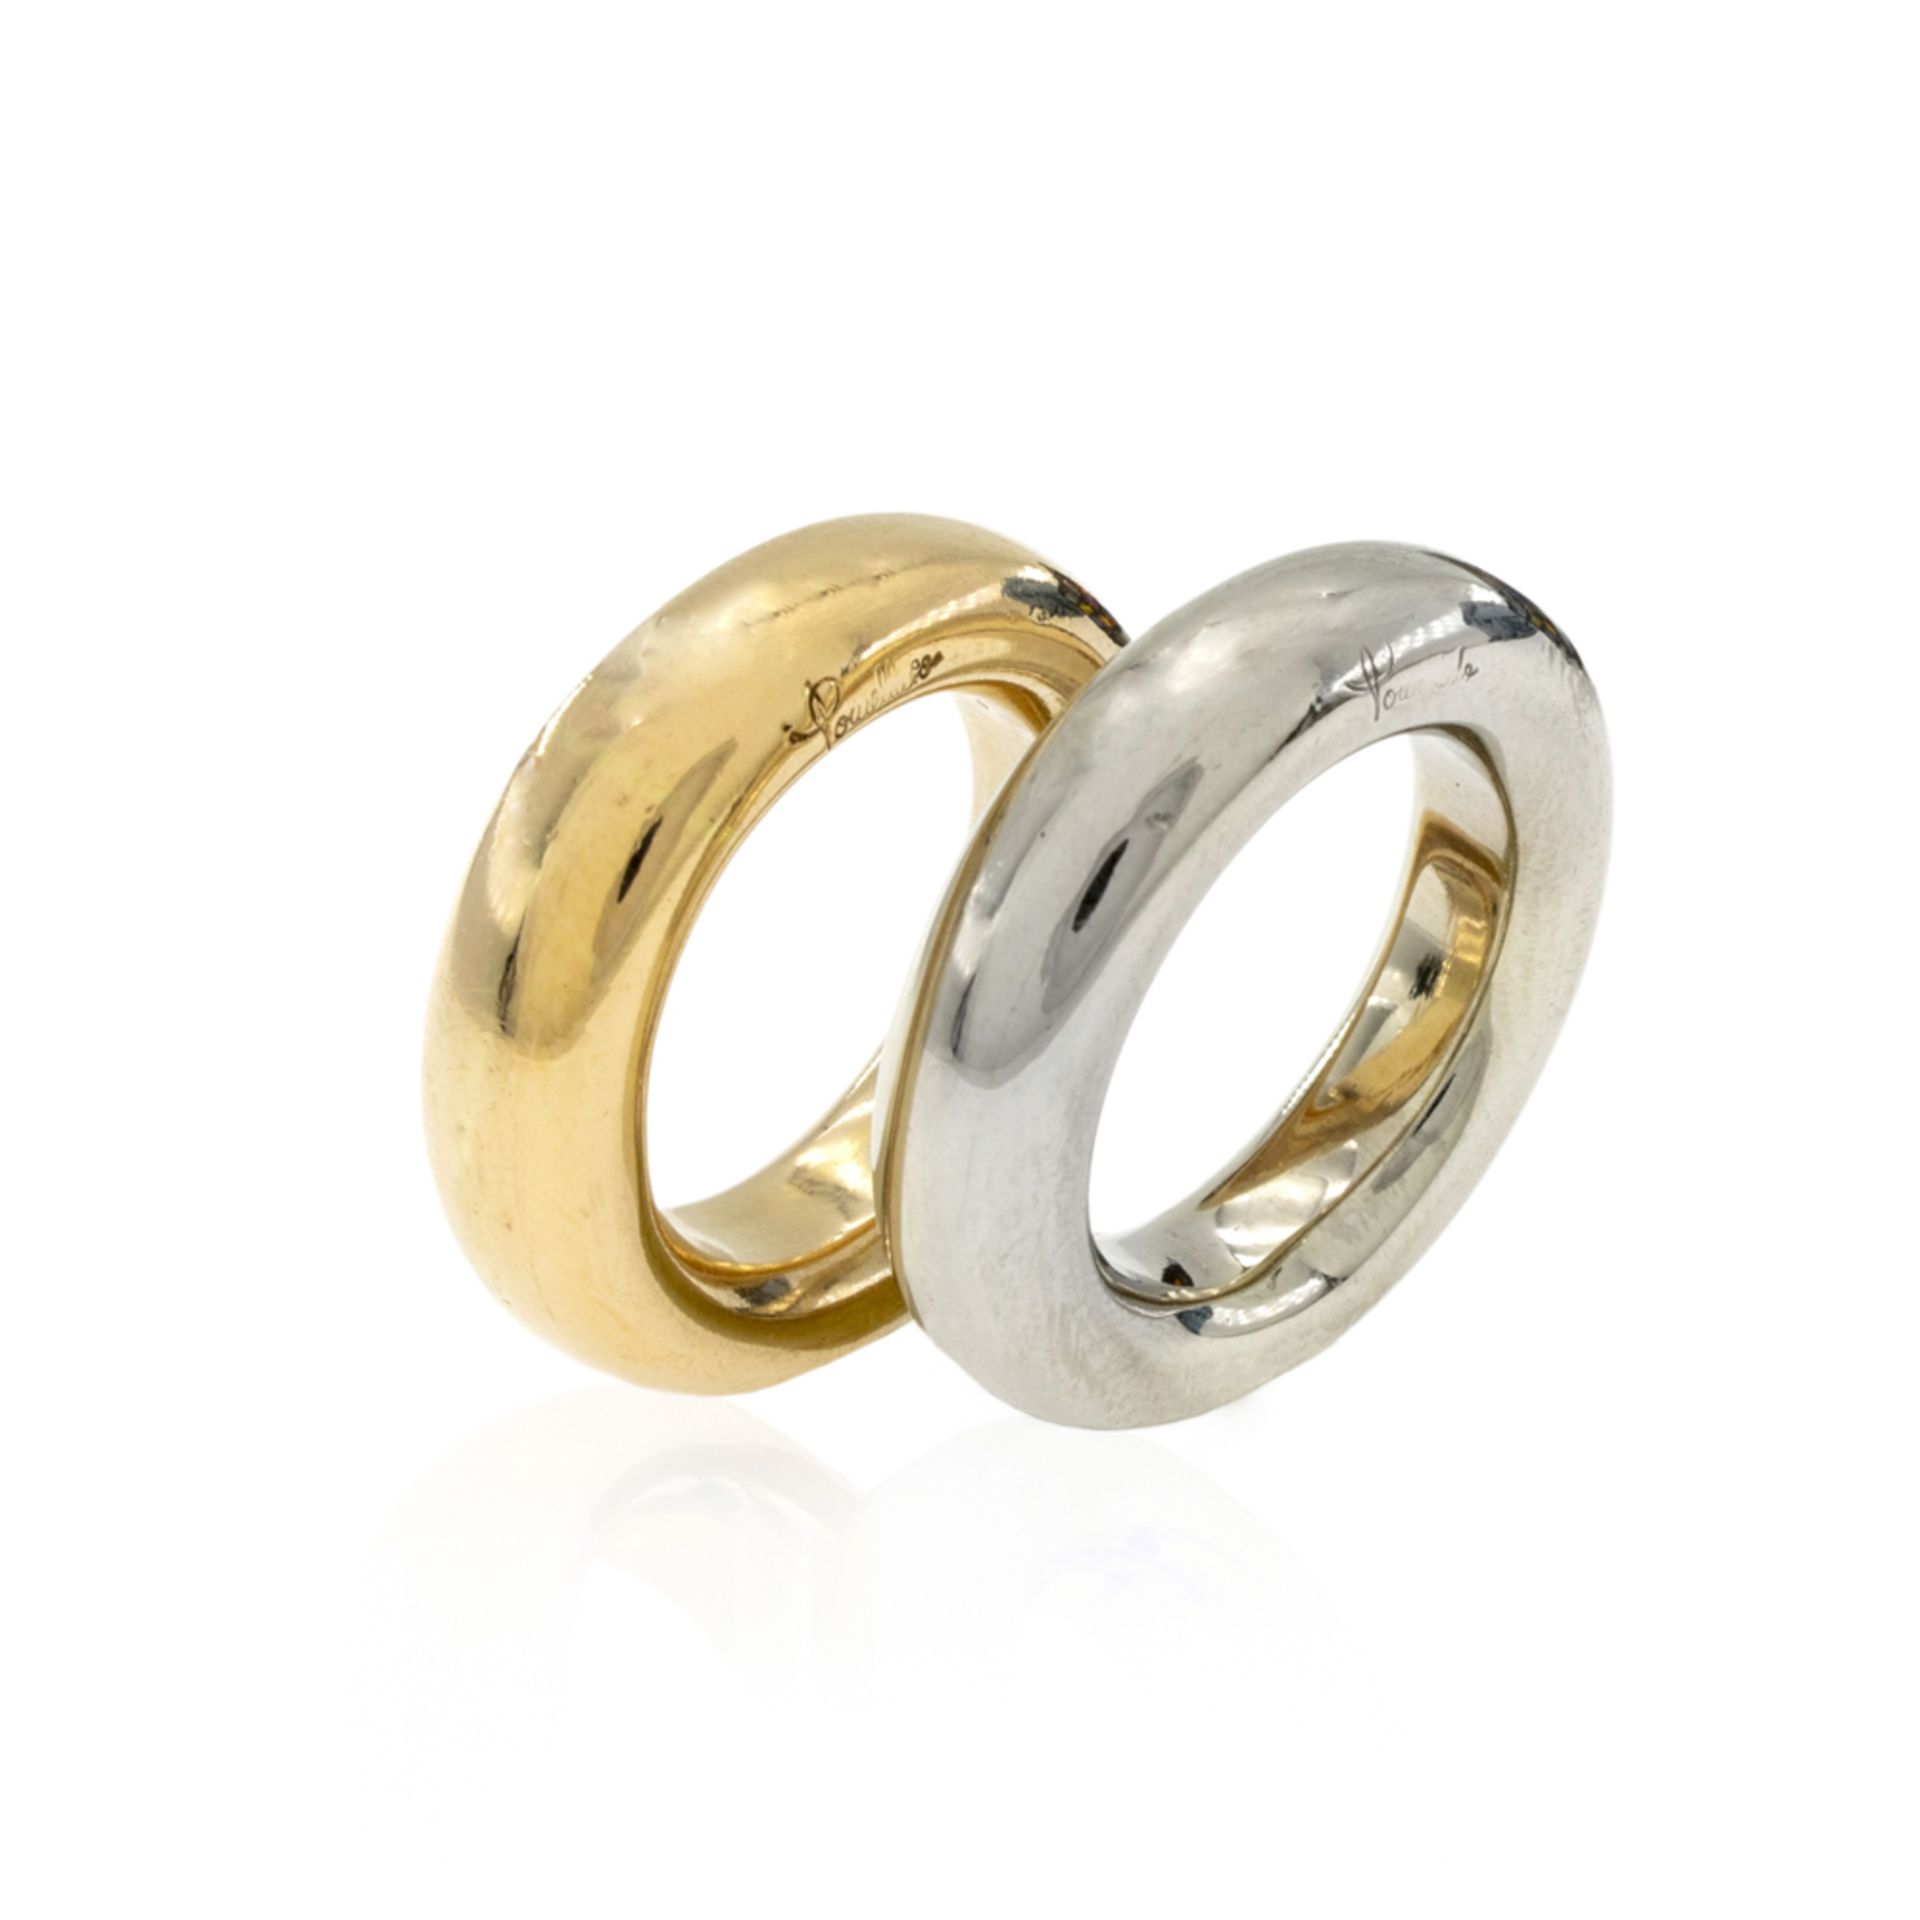 Pomellato pair of Iconica Slim collection rings